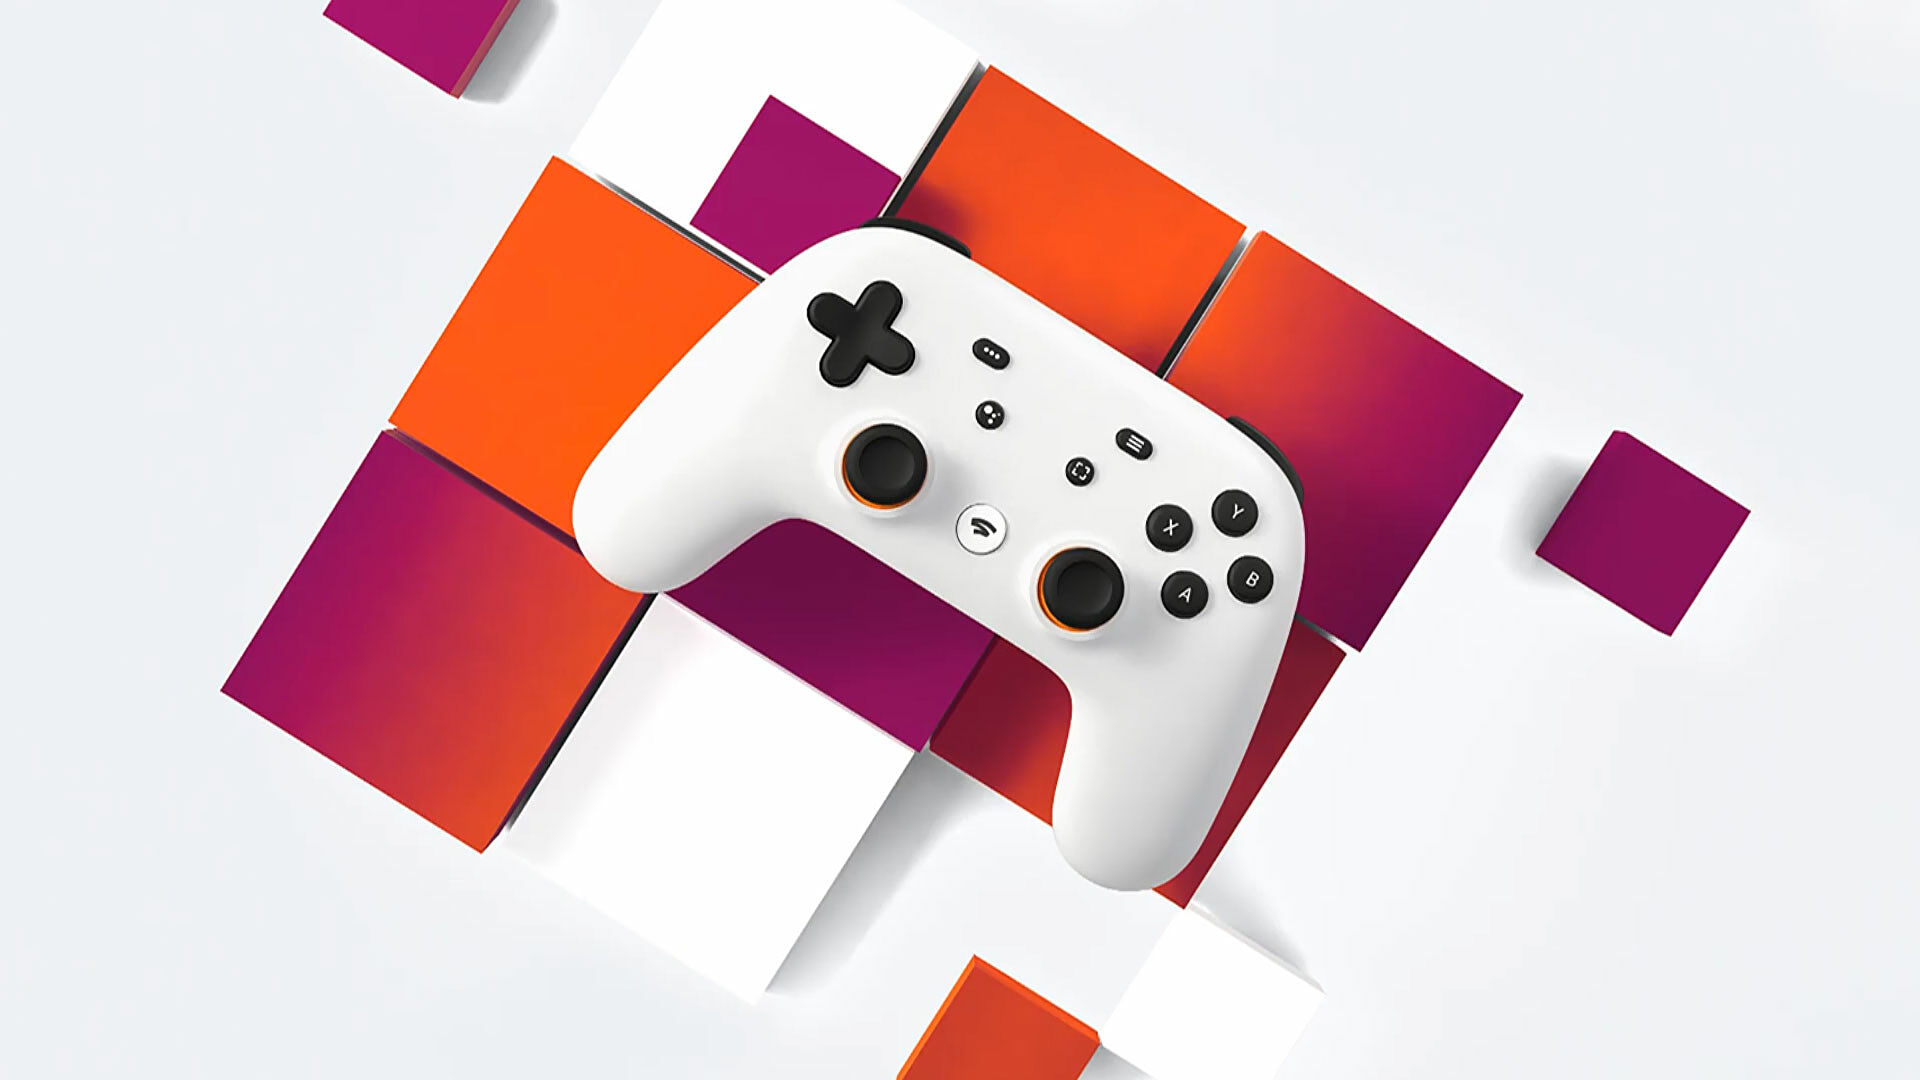 Google releases its “humble” test title on Stadia for one last hurrah